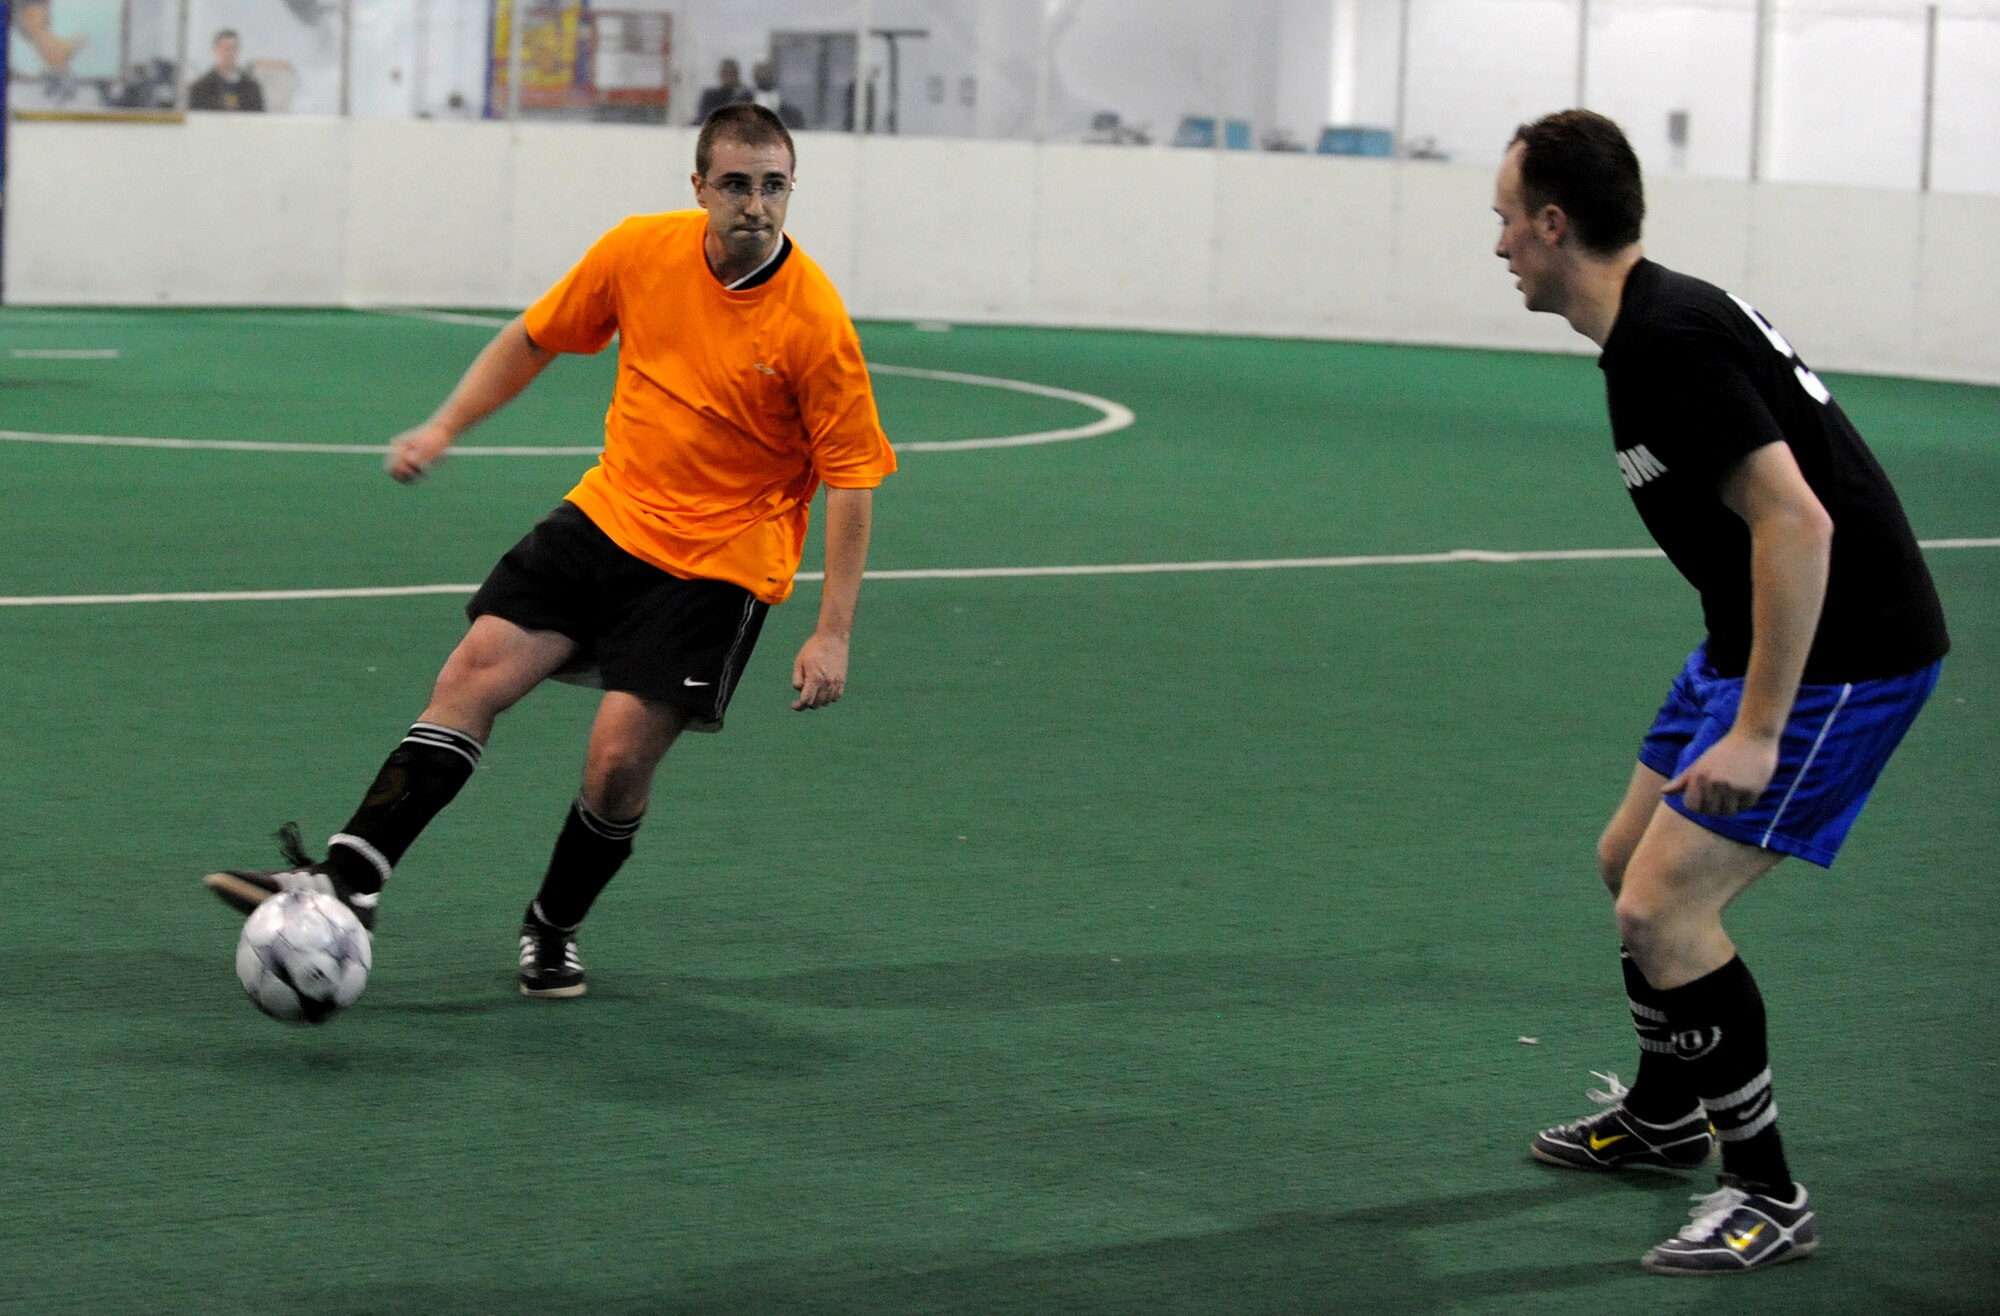 OFFUTT AIR FORCE BASE, Neb. -- Jason Gragan, 55th Communications Group, dribbles the ball past Andrew Smith, U.S. Strategic Command, during the intramural soccer championship game held at the Offutt Field House Feb. 2.  The intramural soccer league ended with STRATCOM defeating the 55th CG 4-1.

U.S. Air Force Photo by Josh Plueger

